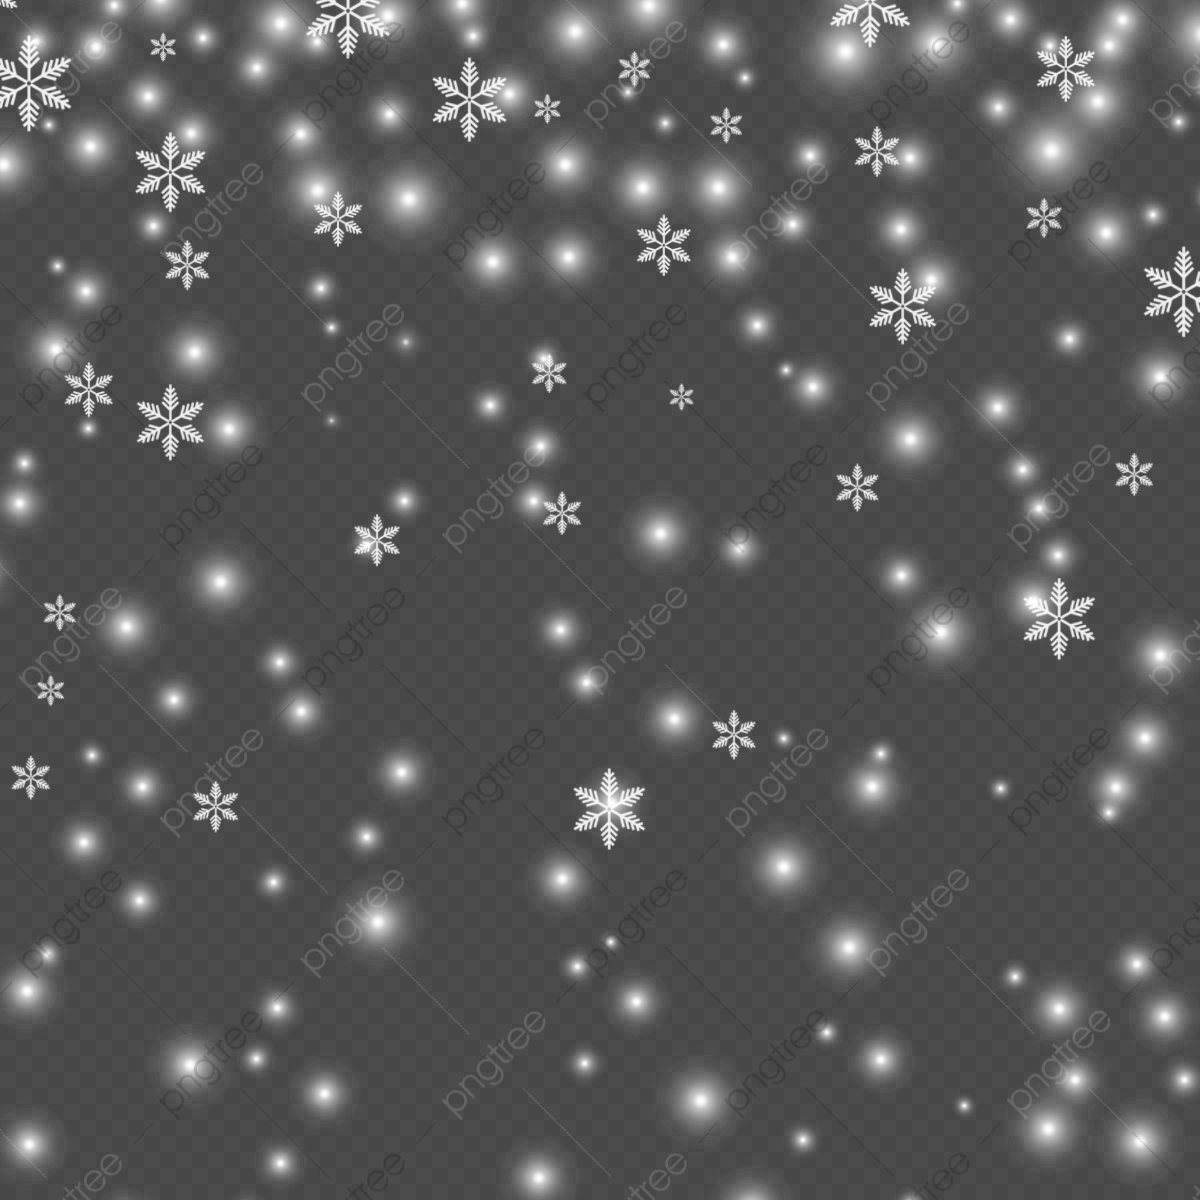 Snow overlay download free clip art with a transparent.